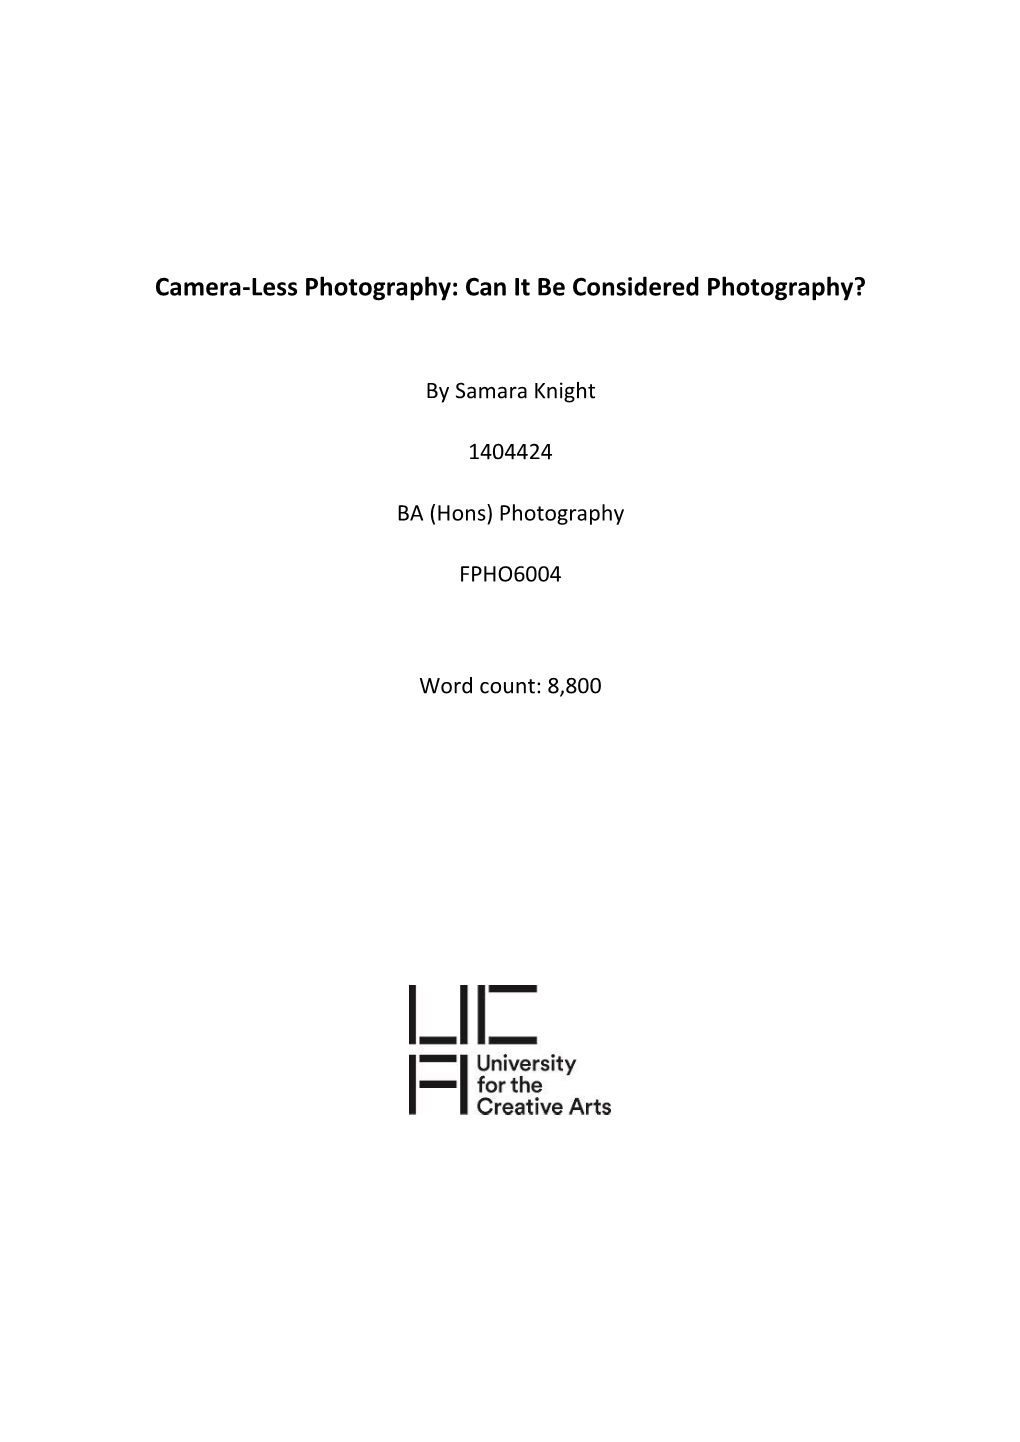 Camera-Less Photography: Can It Be Considered Photography?